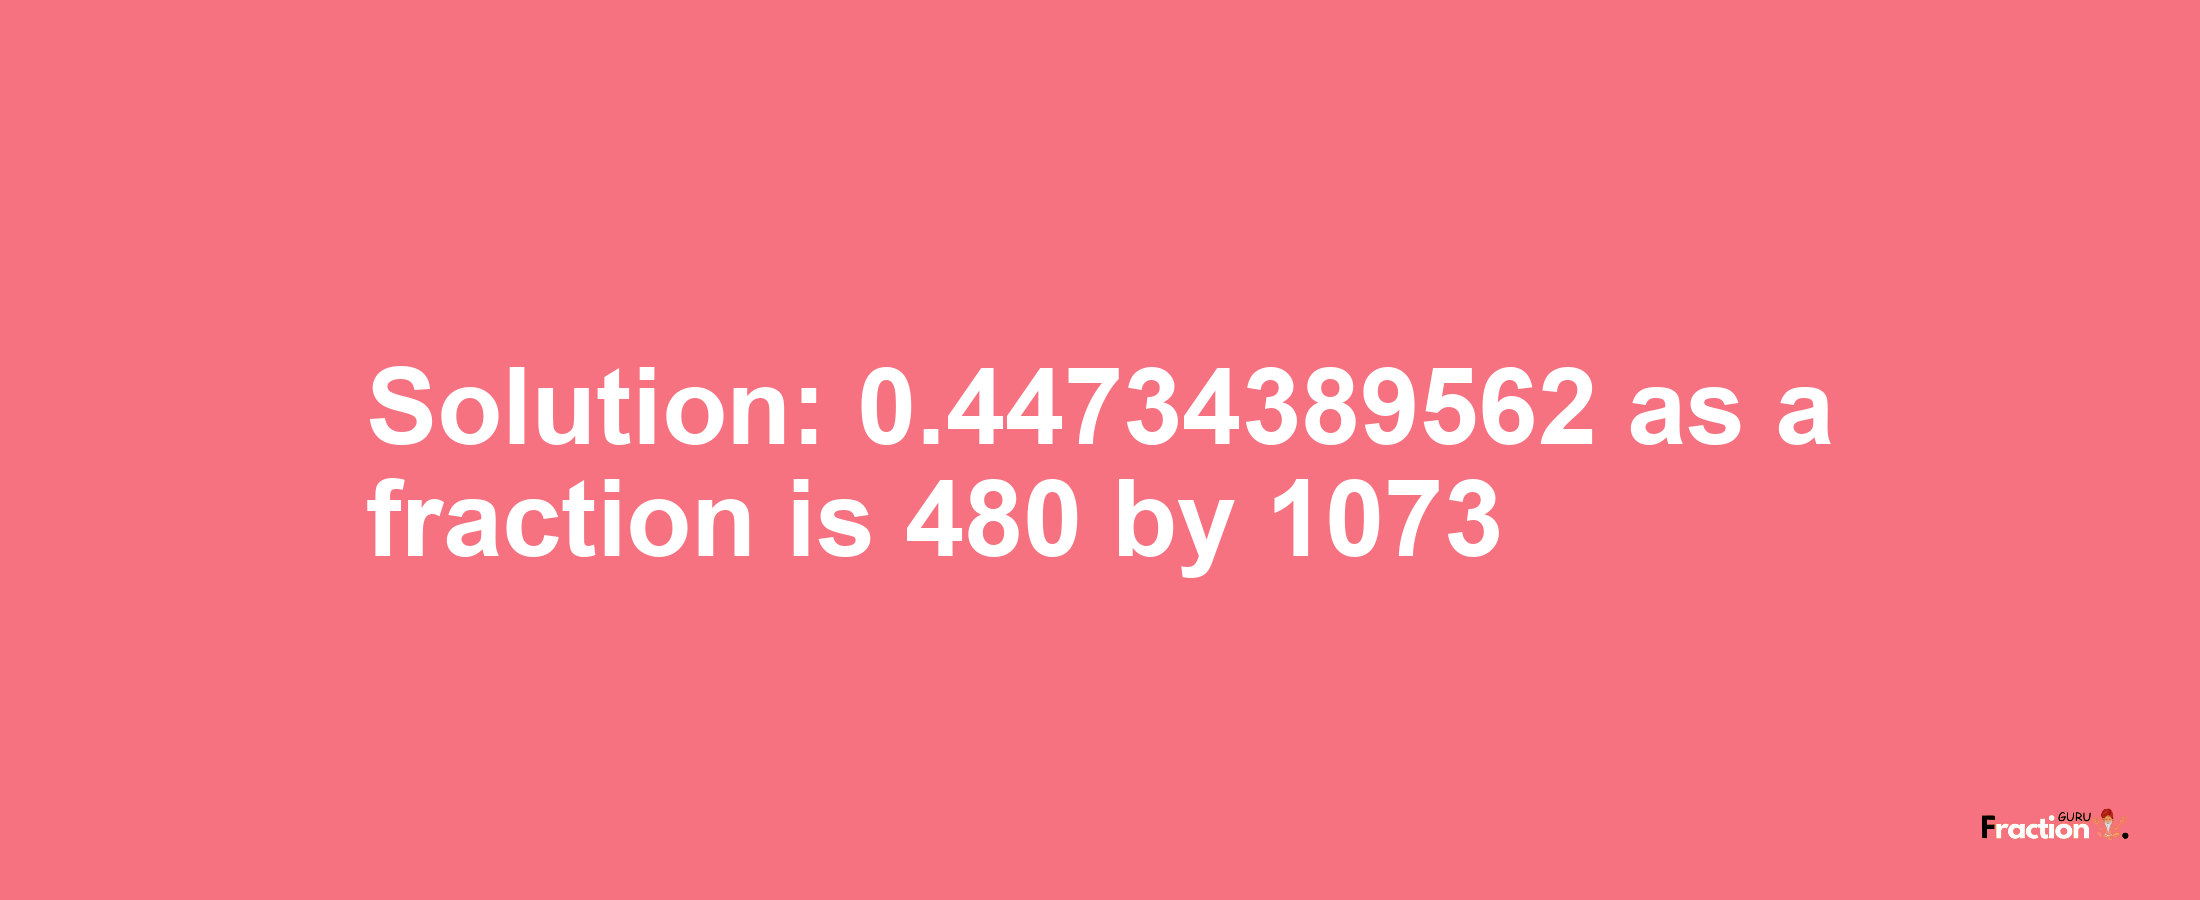 Solution:0.44734389562 as a fraction is 480/1073